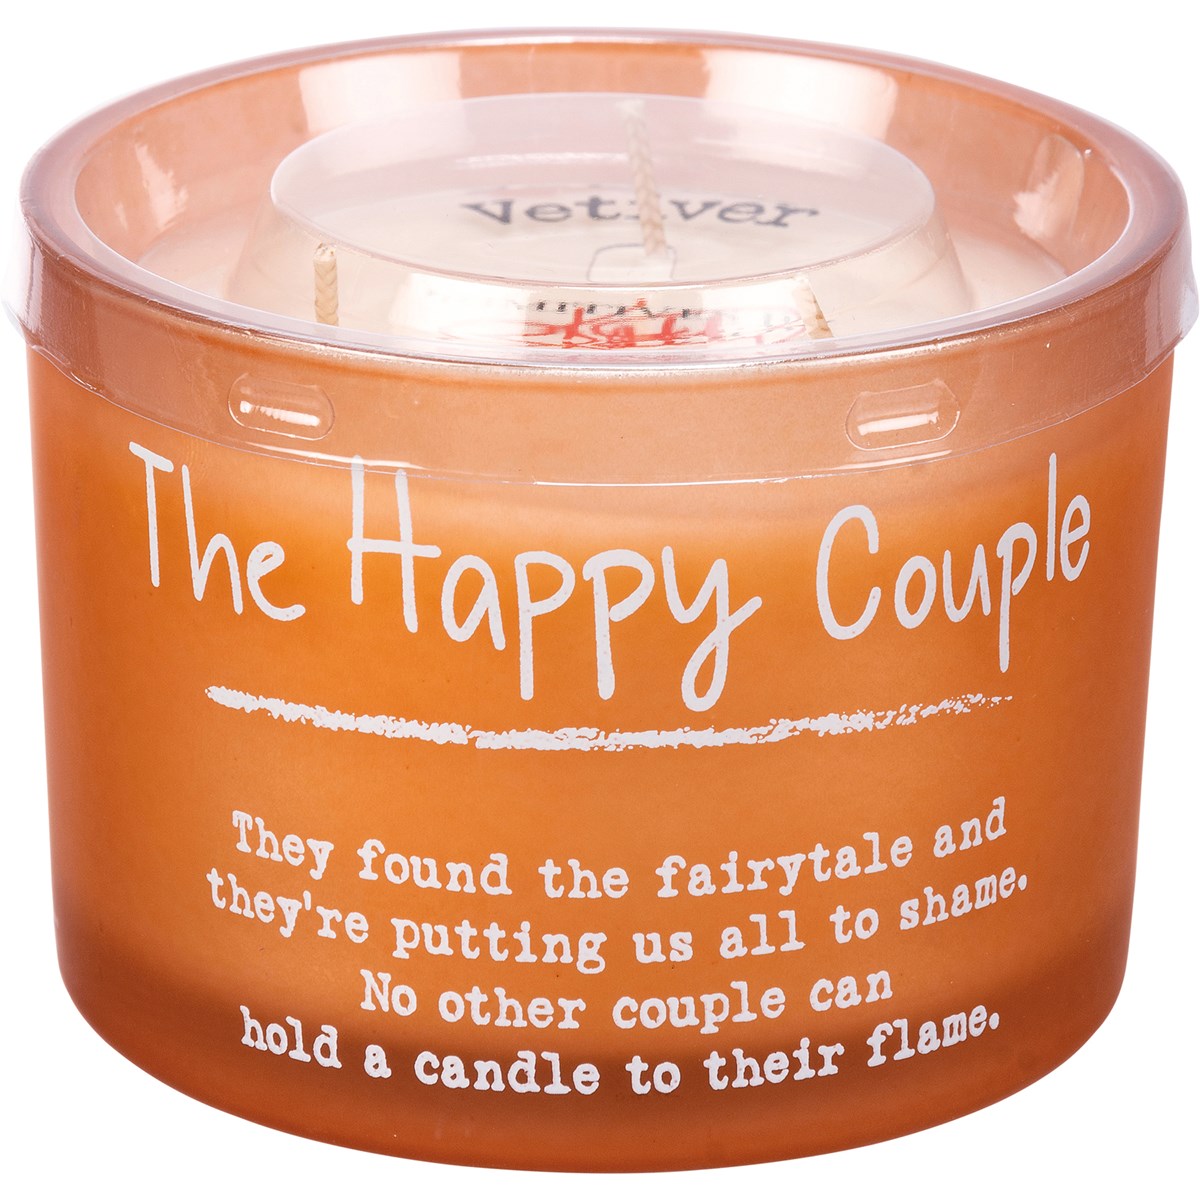 The Happy Couple Jar Candle - Soy Wax, Glass, Cotton